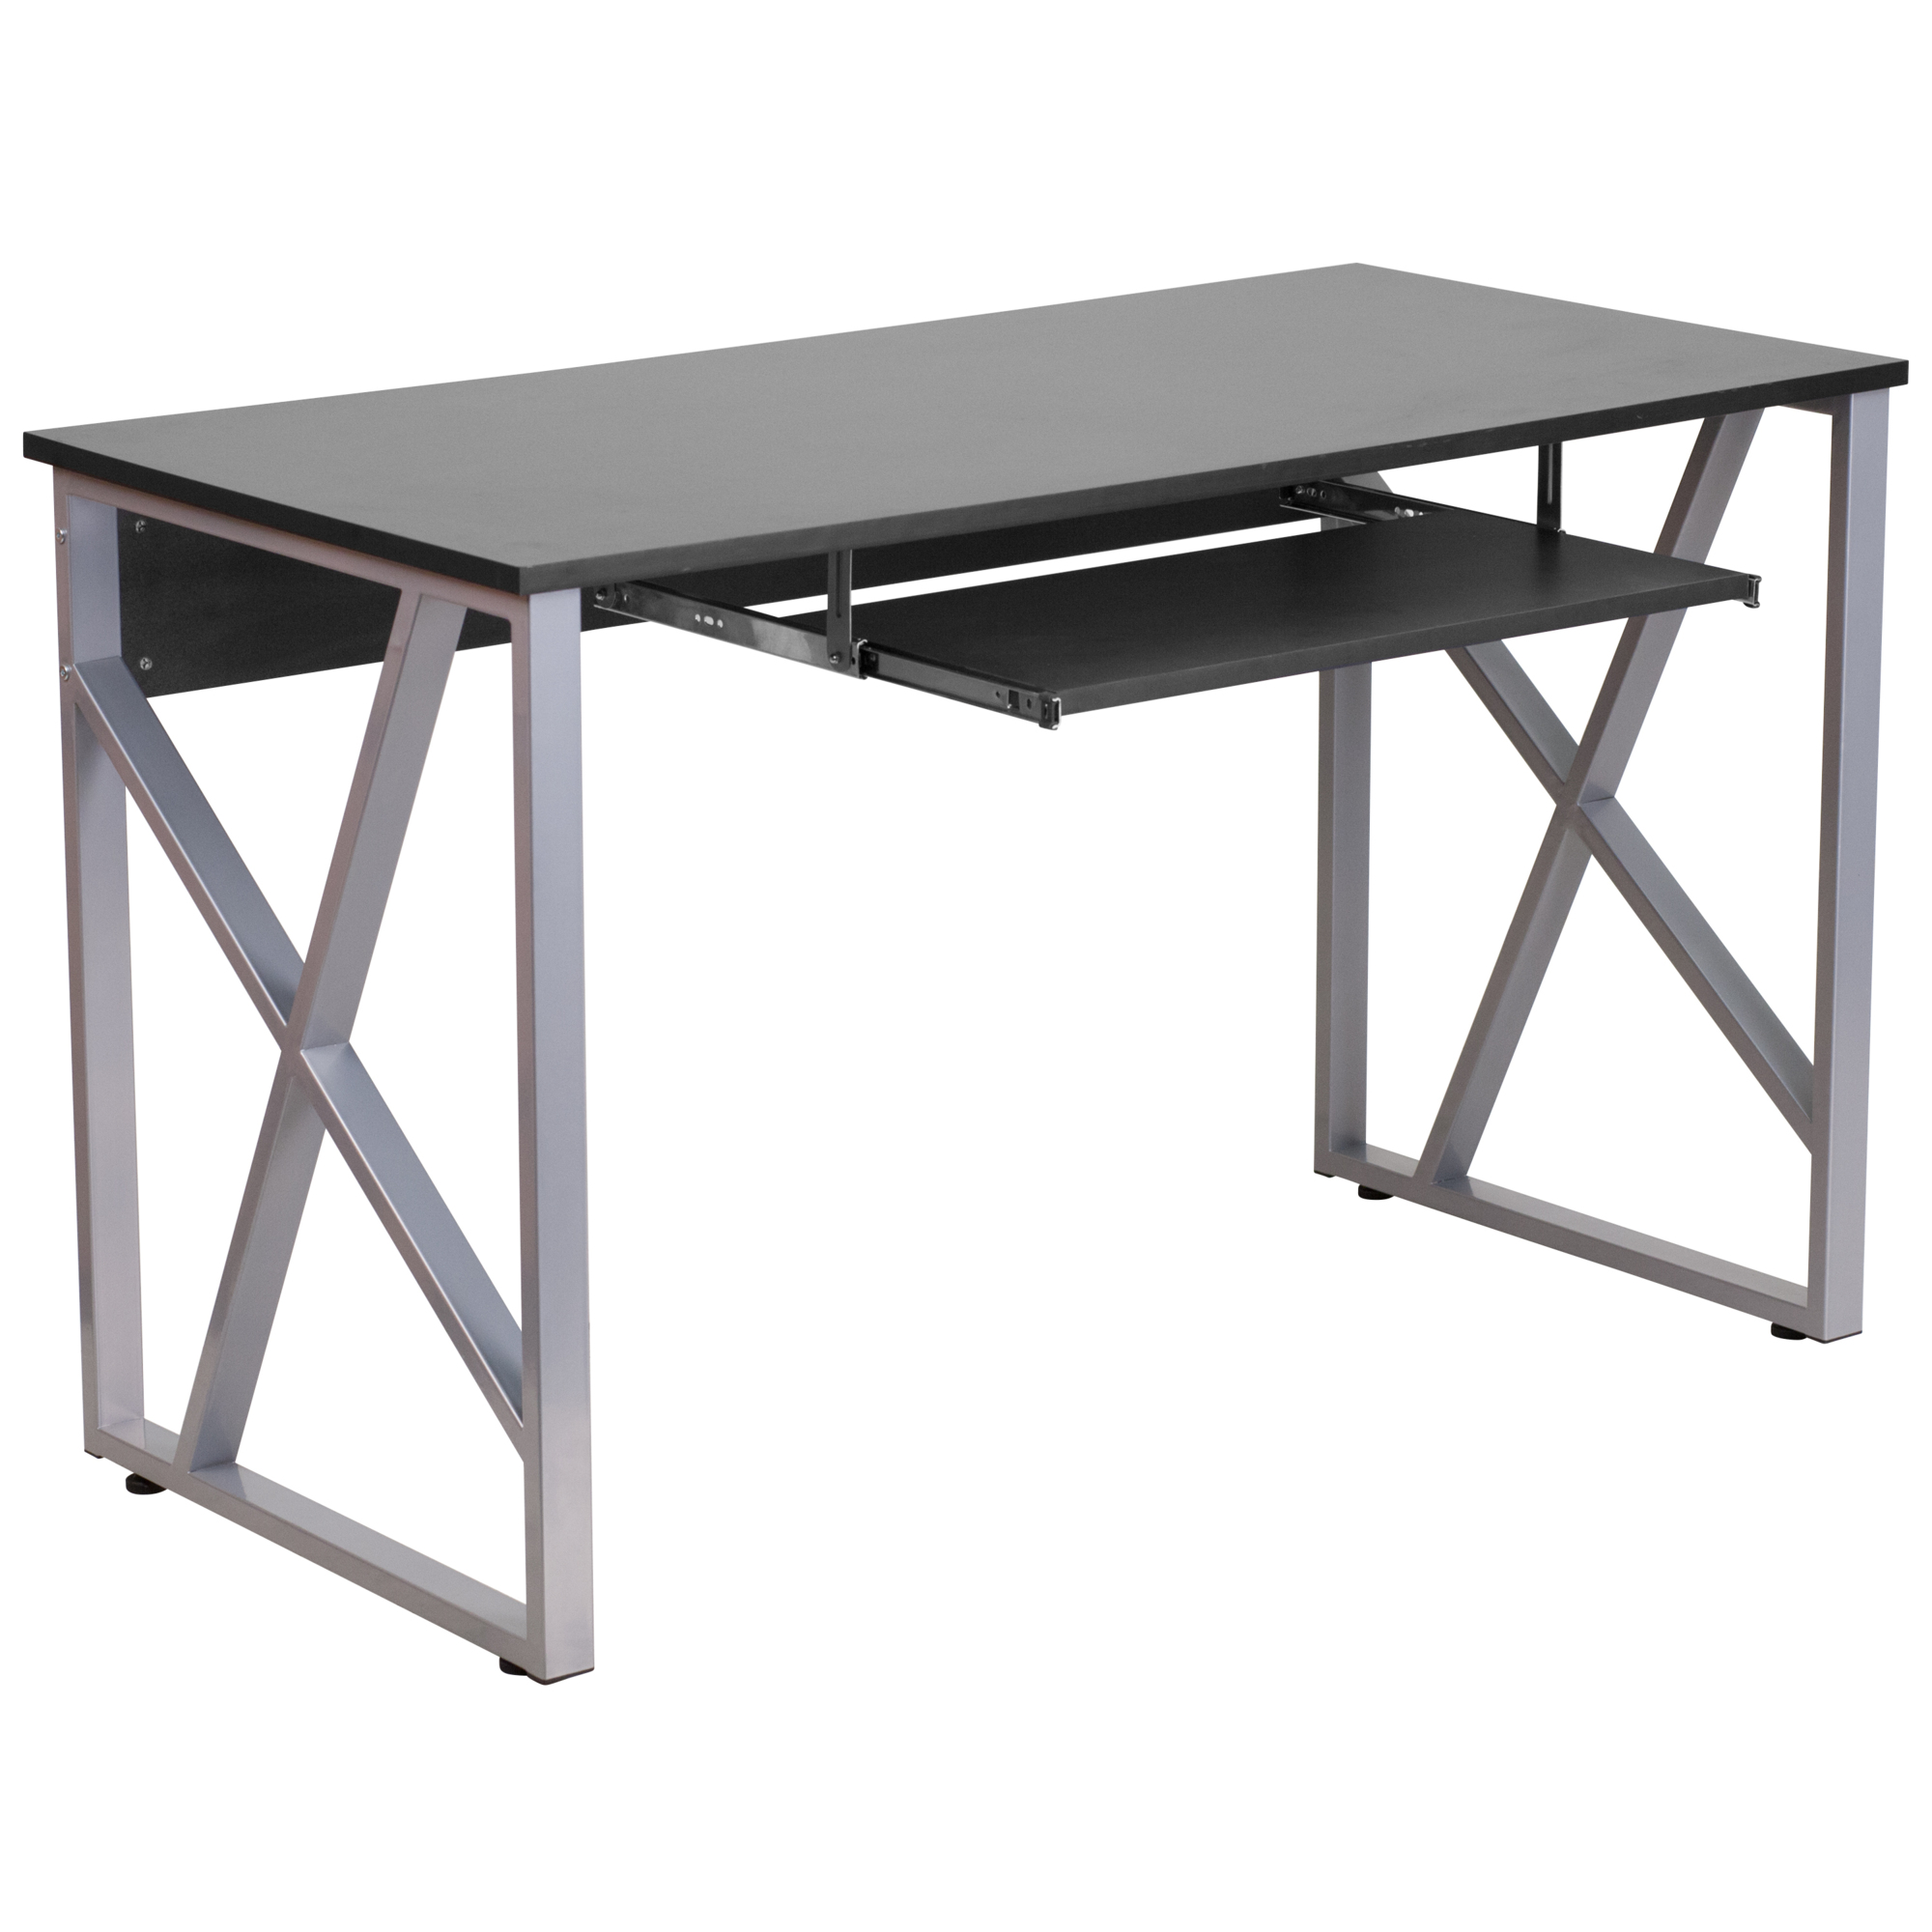 Flash Furniture, Black Computer Desk with Pull-Out Keyboard Tray, Width 47.25 in, Height 29.25 in, Depth 23.75 in, Model NANWK004